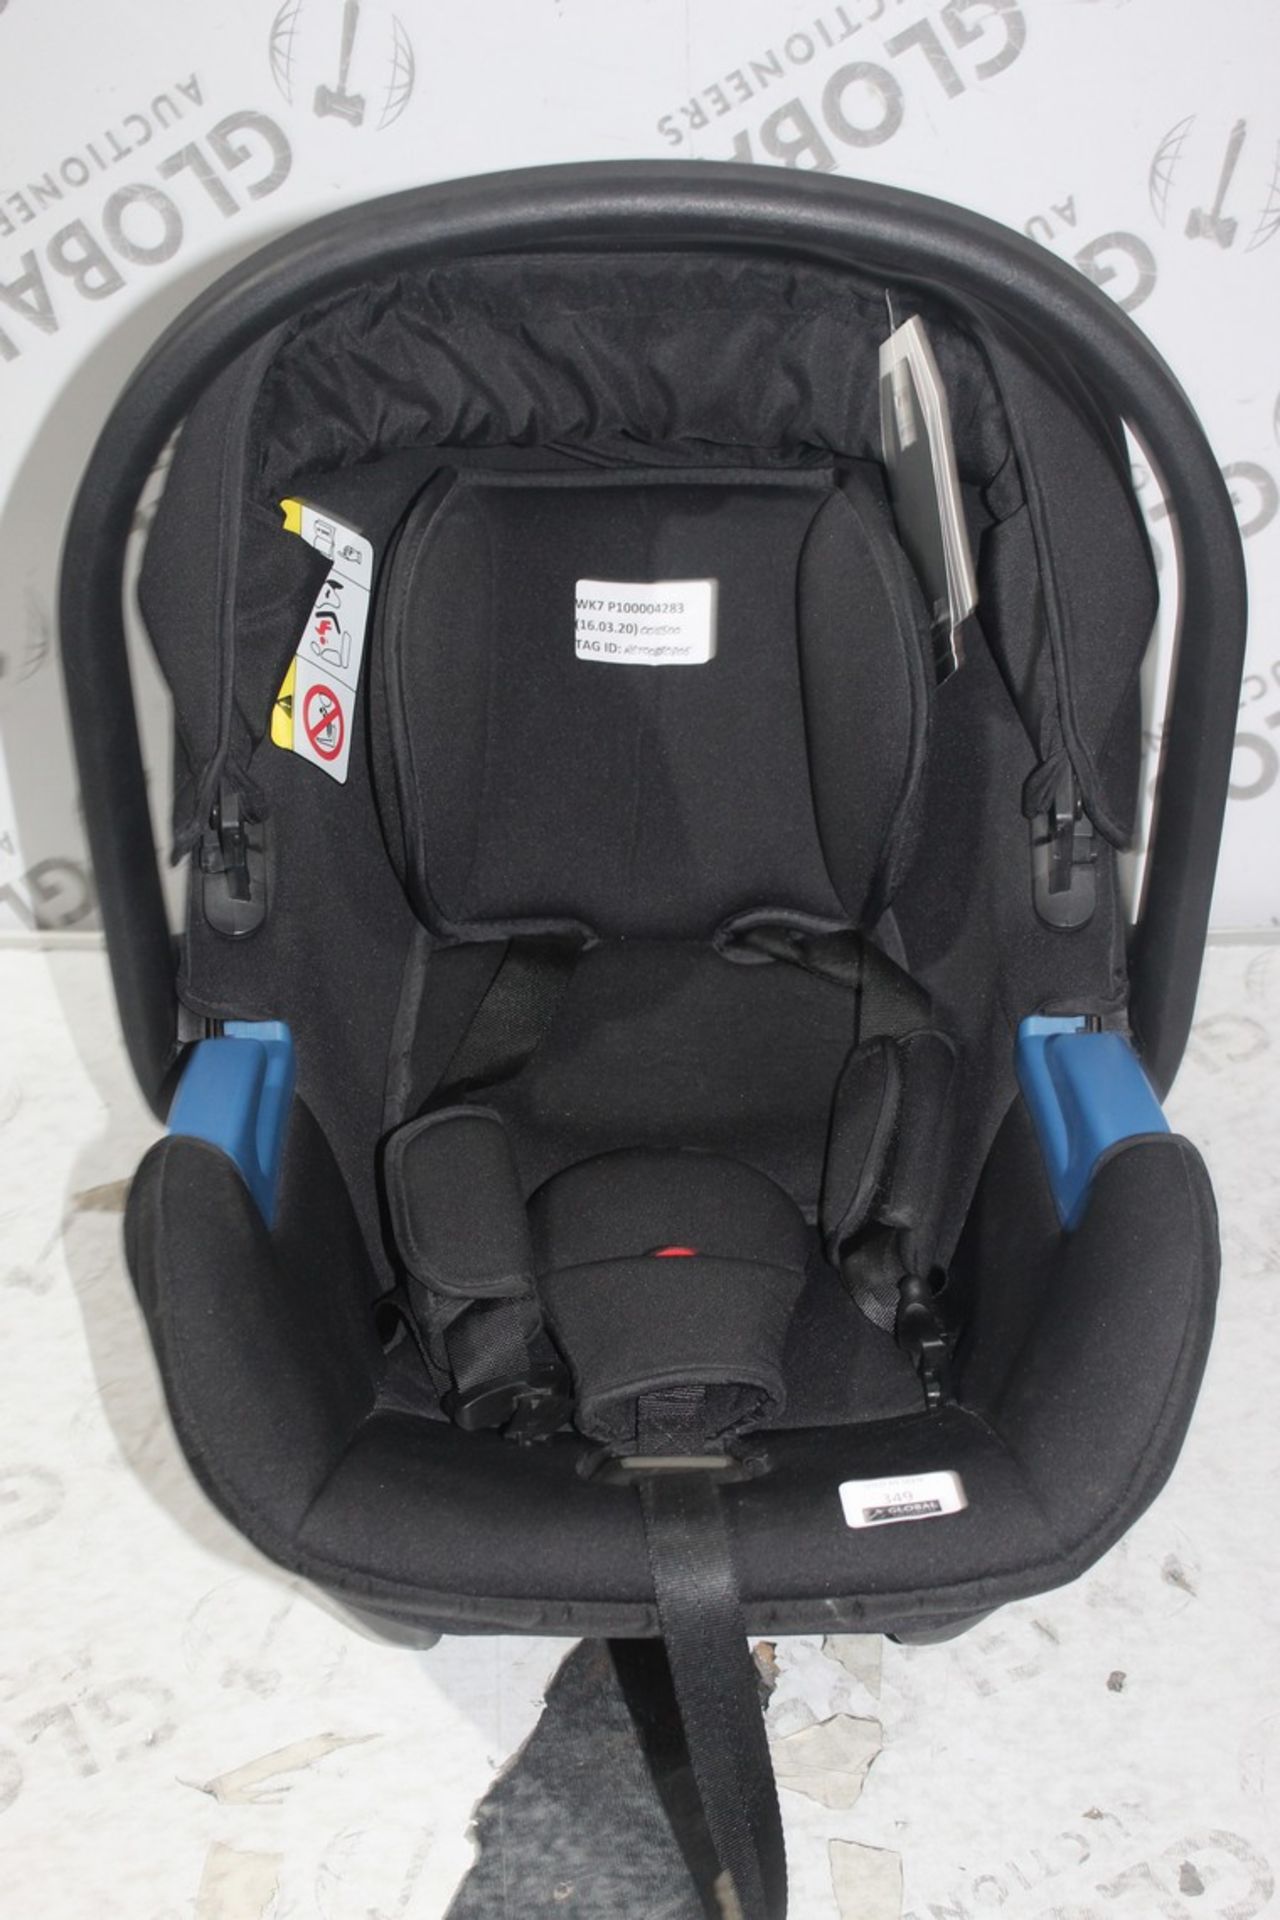 Silver Cross New Born In Car Safety Seat RRP £125 (RET00880805) (Public Viewings & Appraisals